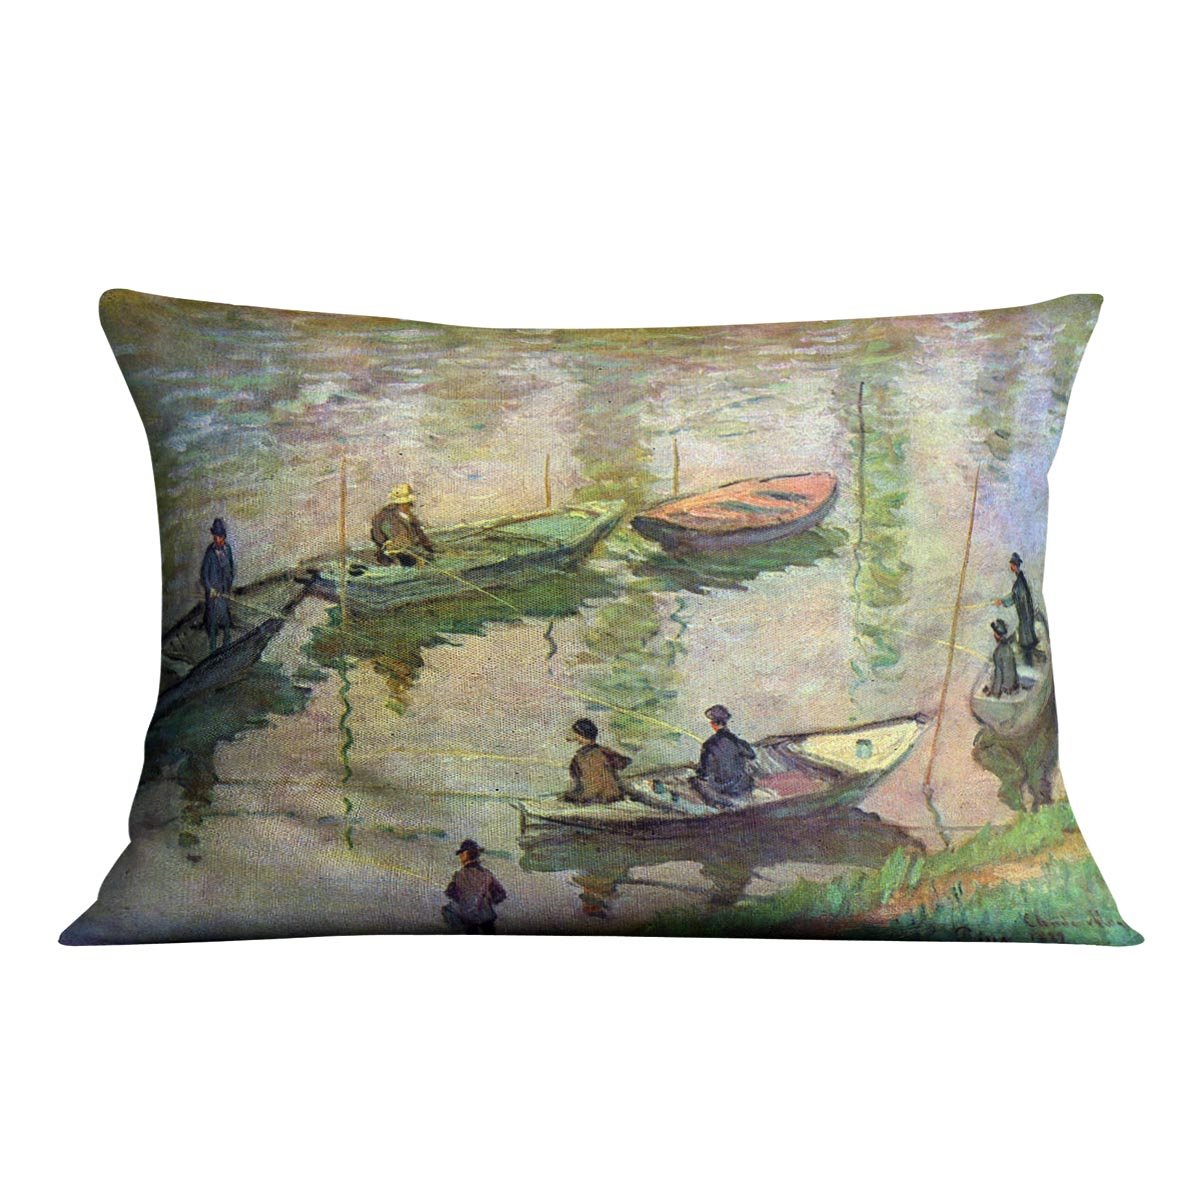 Fishermen on the Seine at Poissy by Monet Throw Pillow